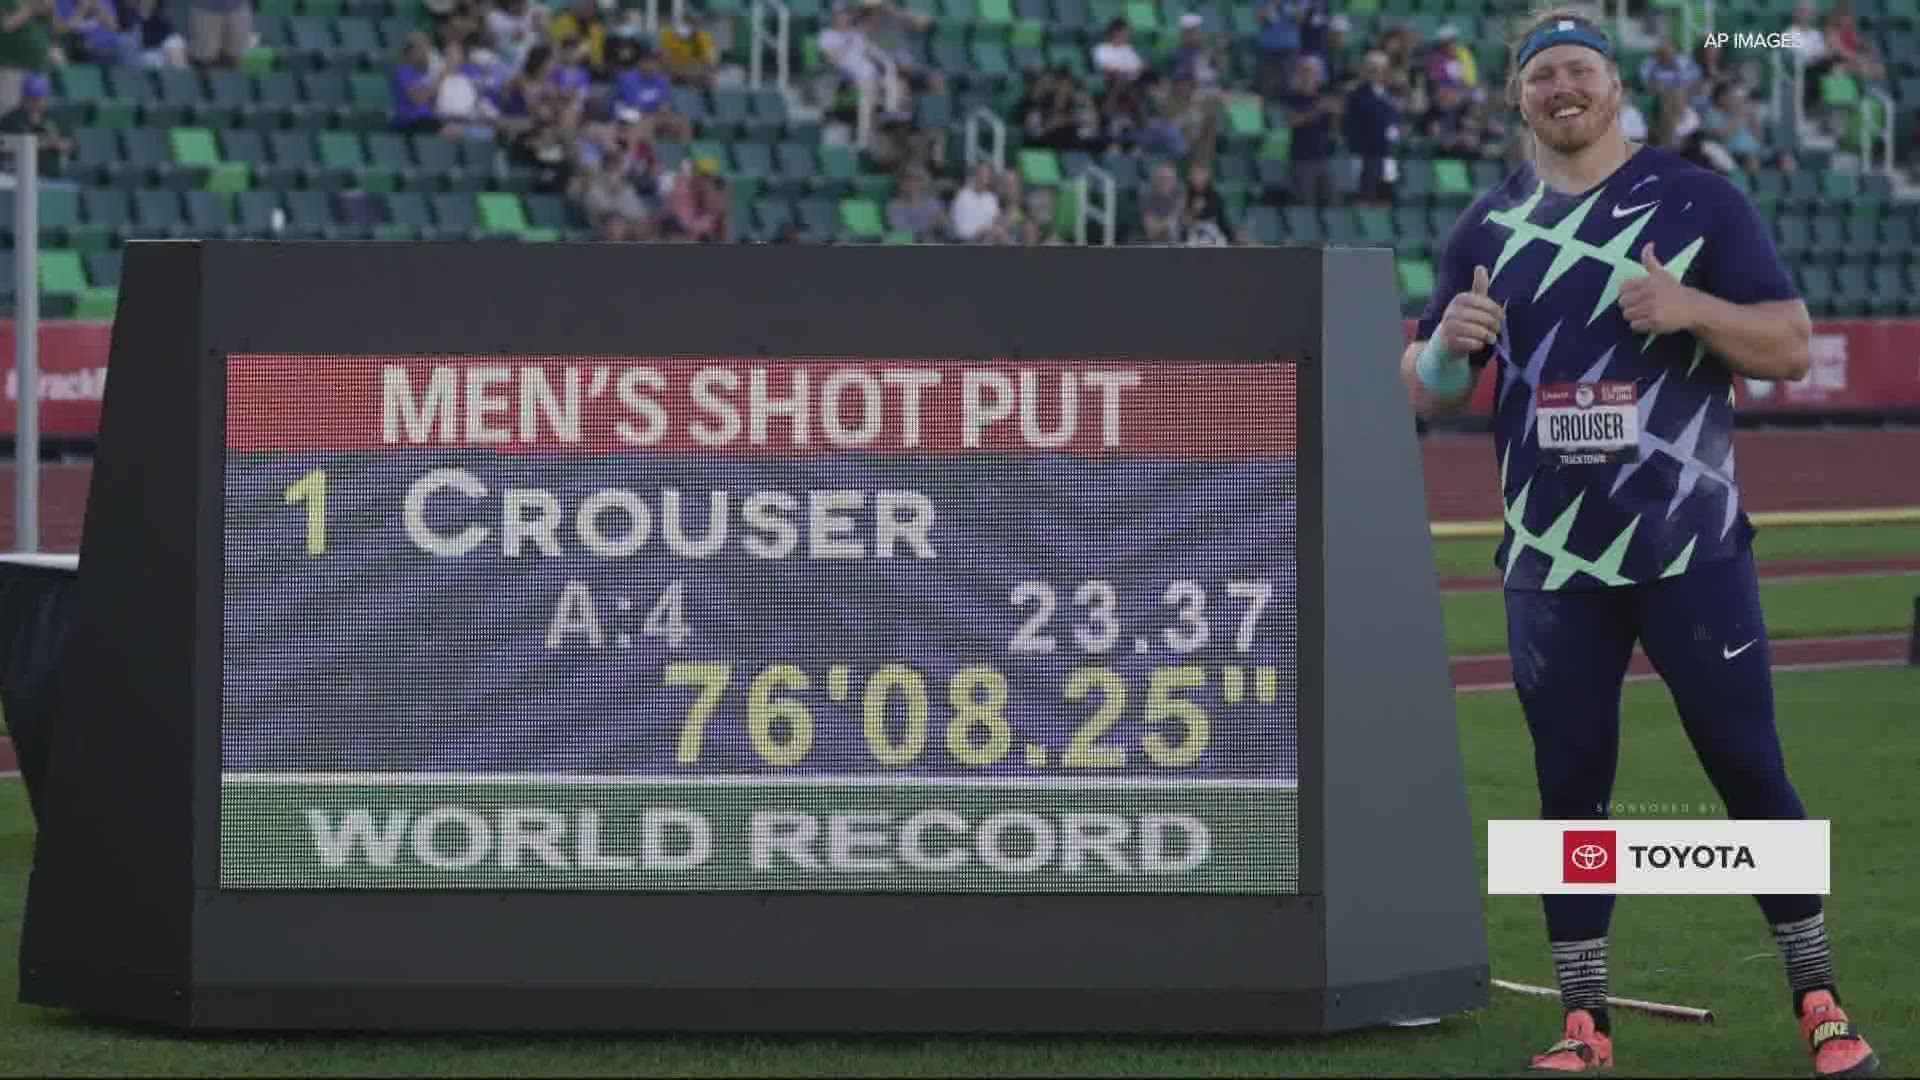 Ryan Crouser, from Barlow High School in Gresham, is one of the greatest shot putters of all time.